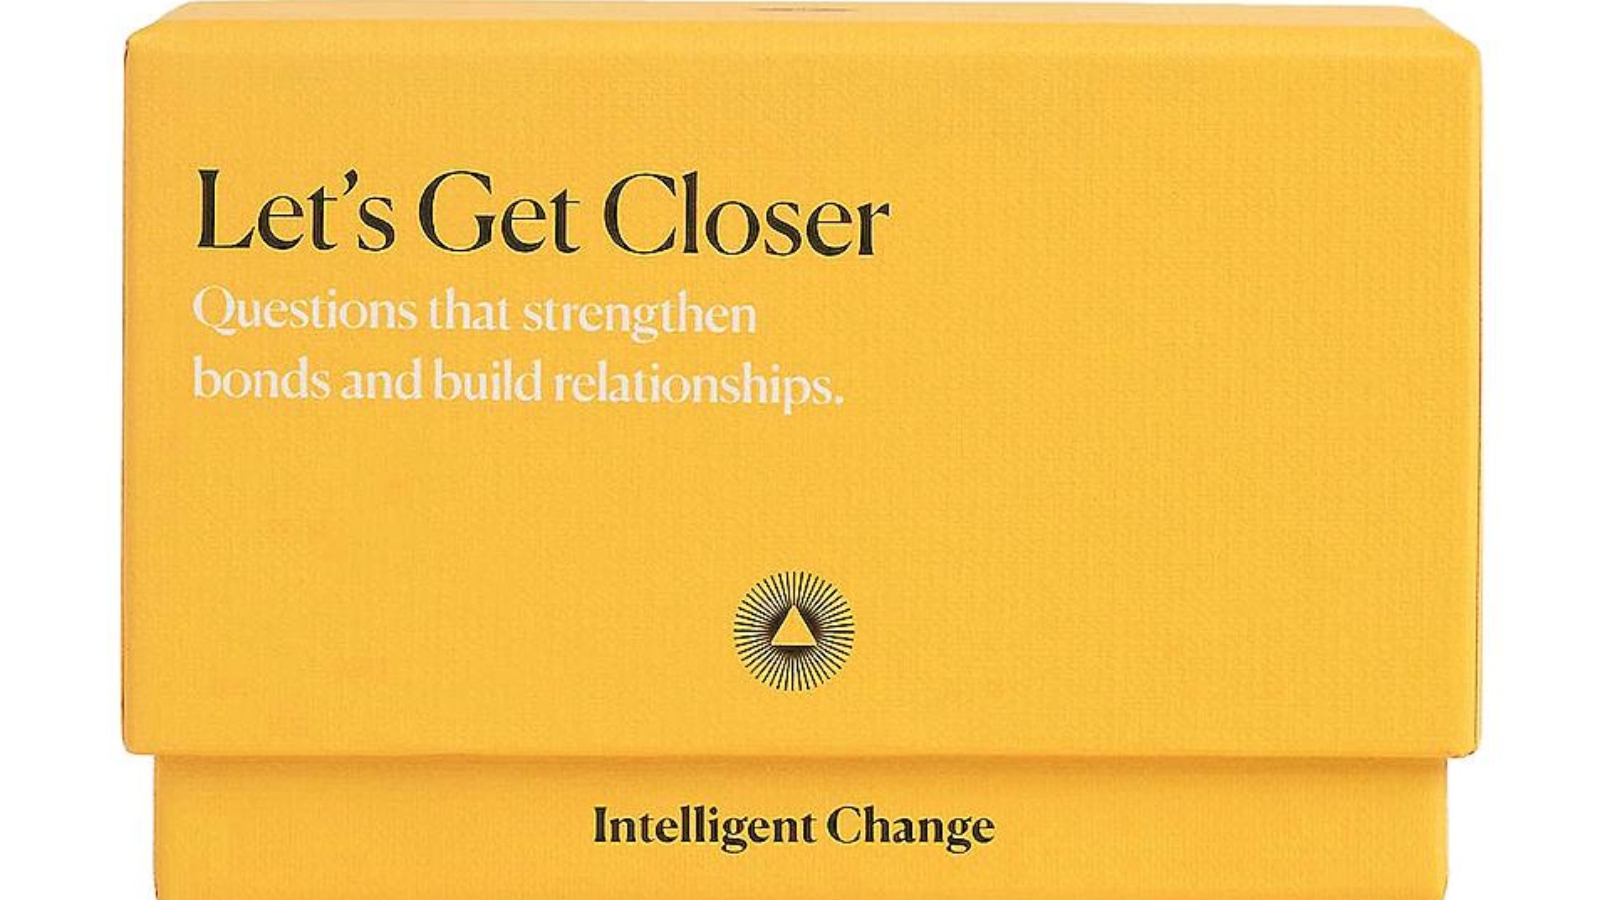 engaging card game that is meant to strengthen relationships through deep, meaningful conversations with friends, family, couples or new acquaintances